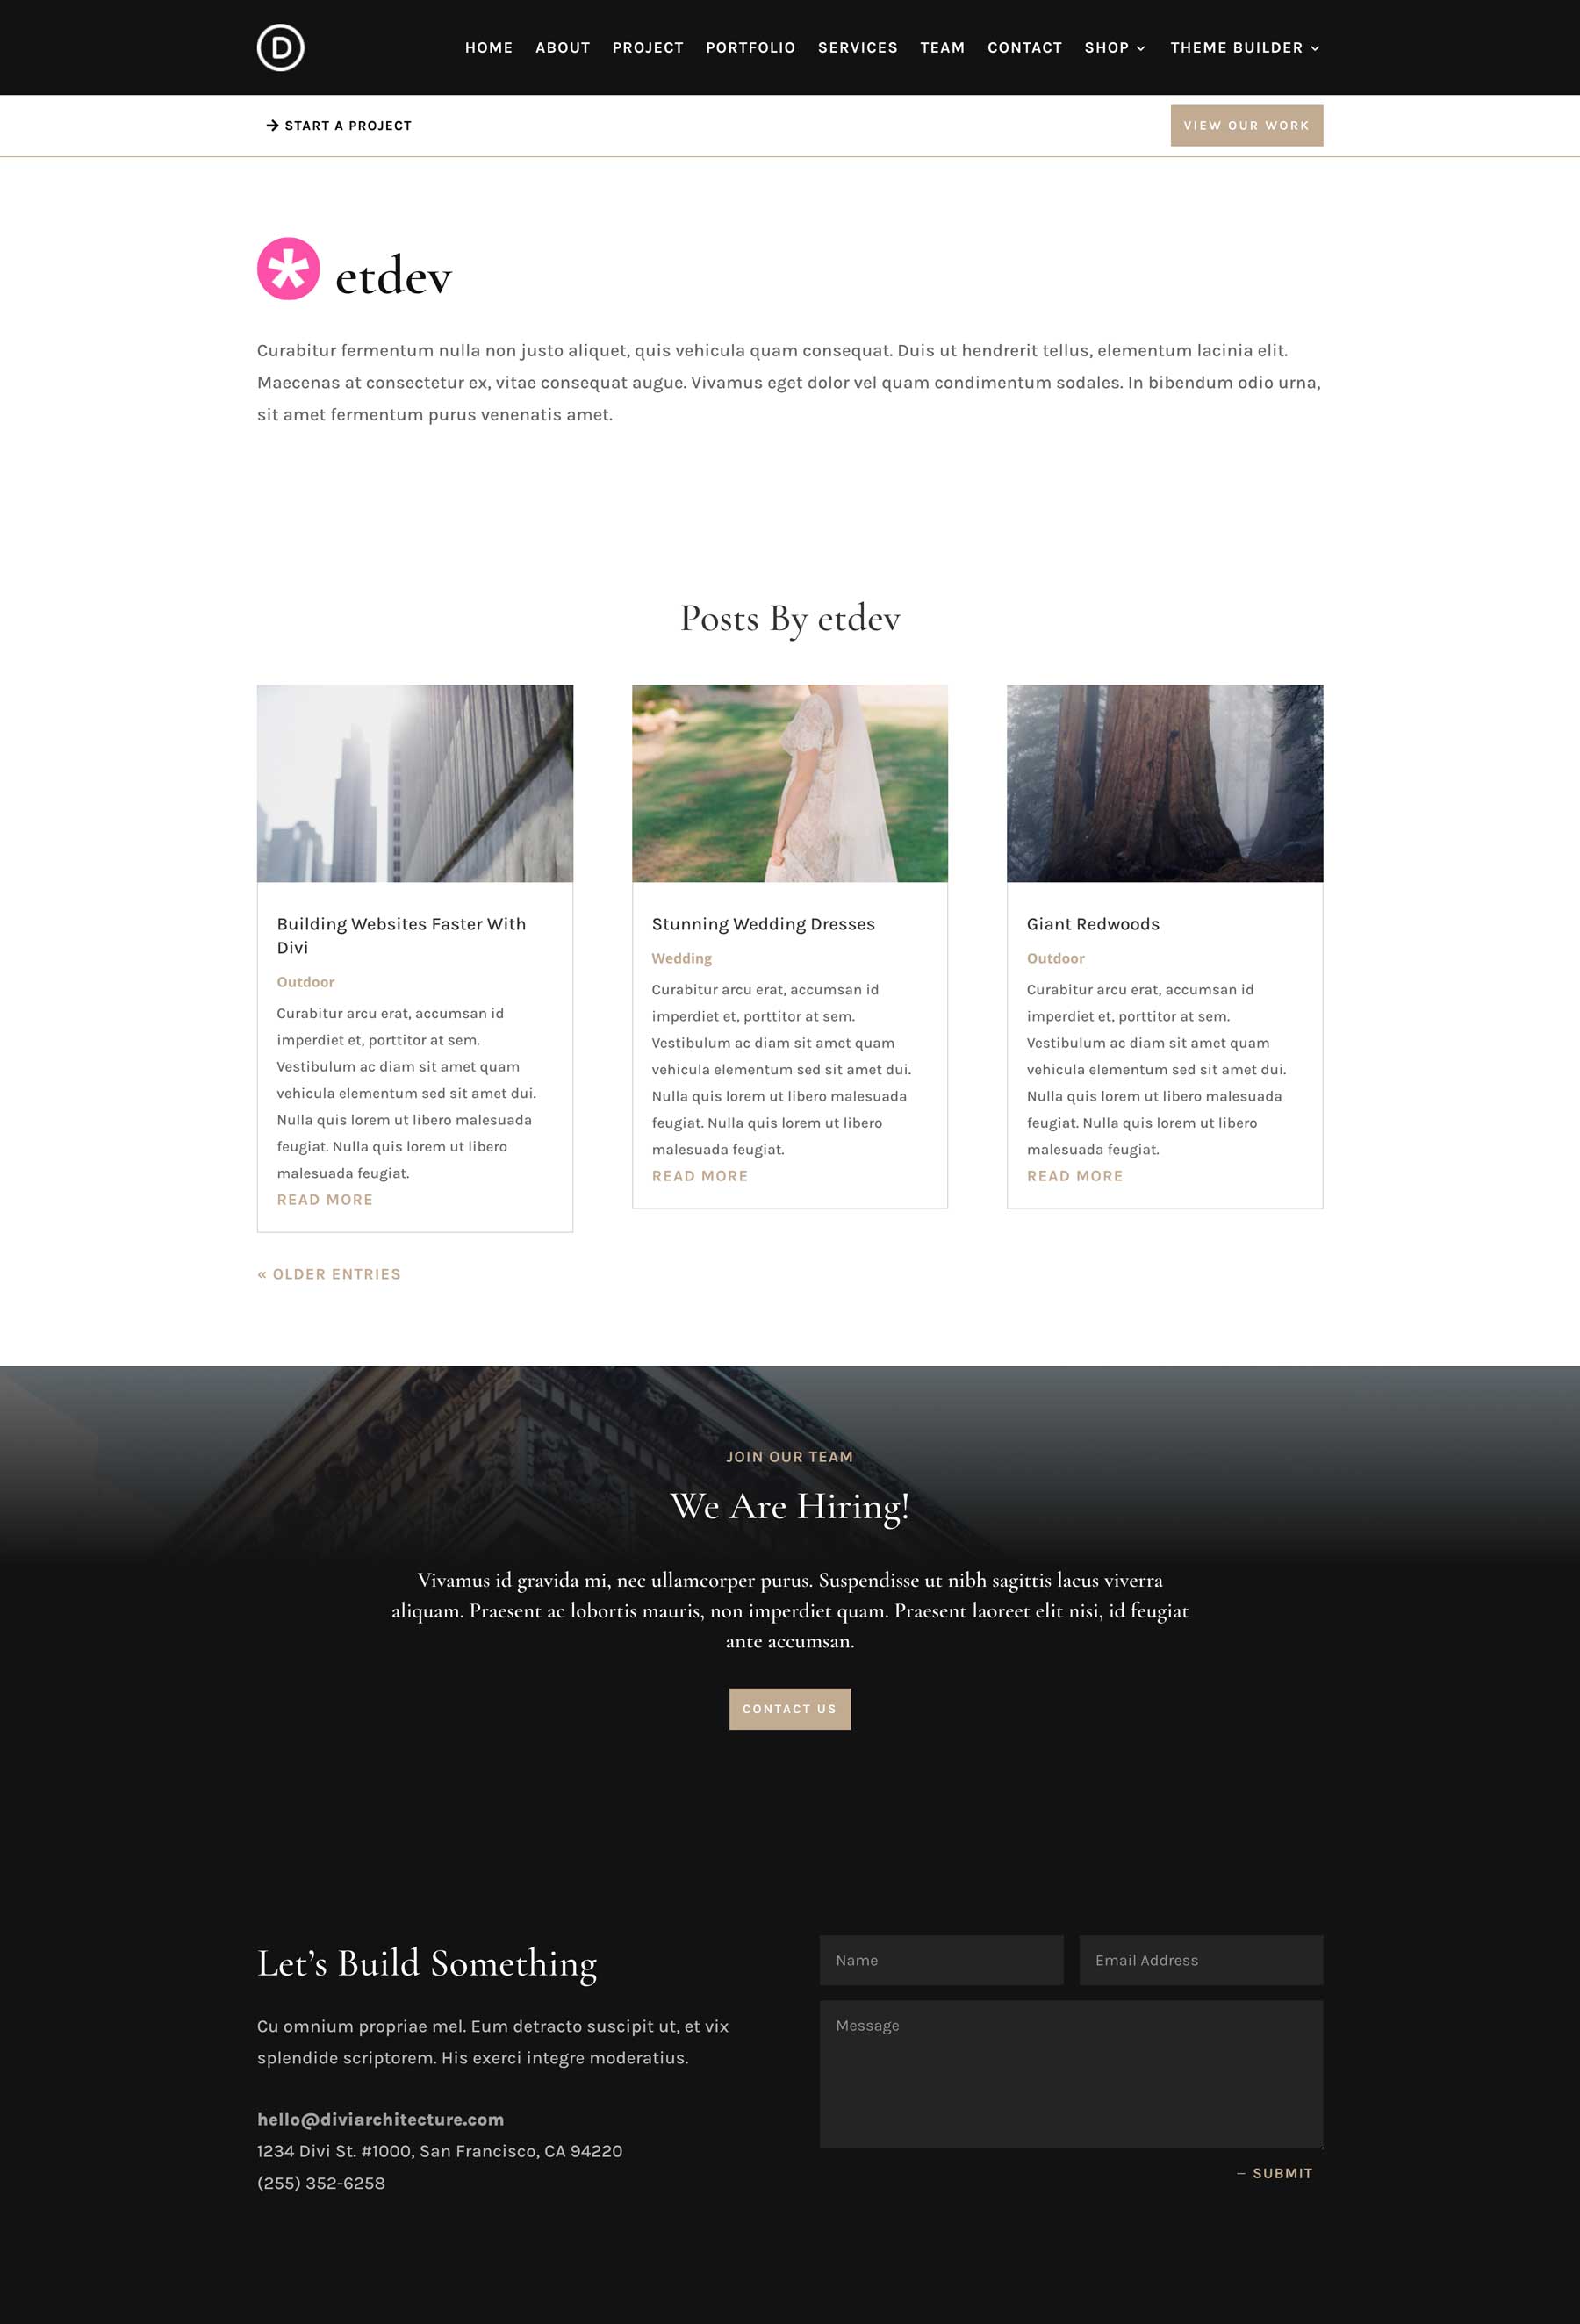 Architecture Firm theme builder pack